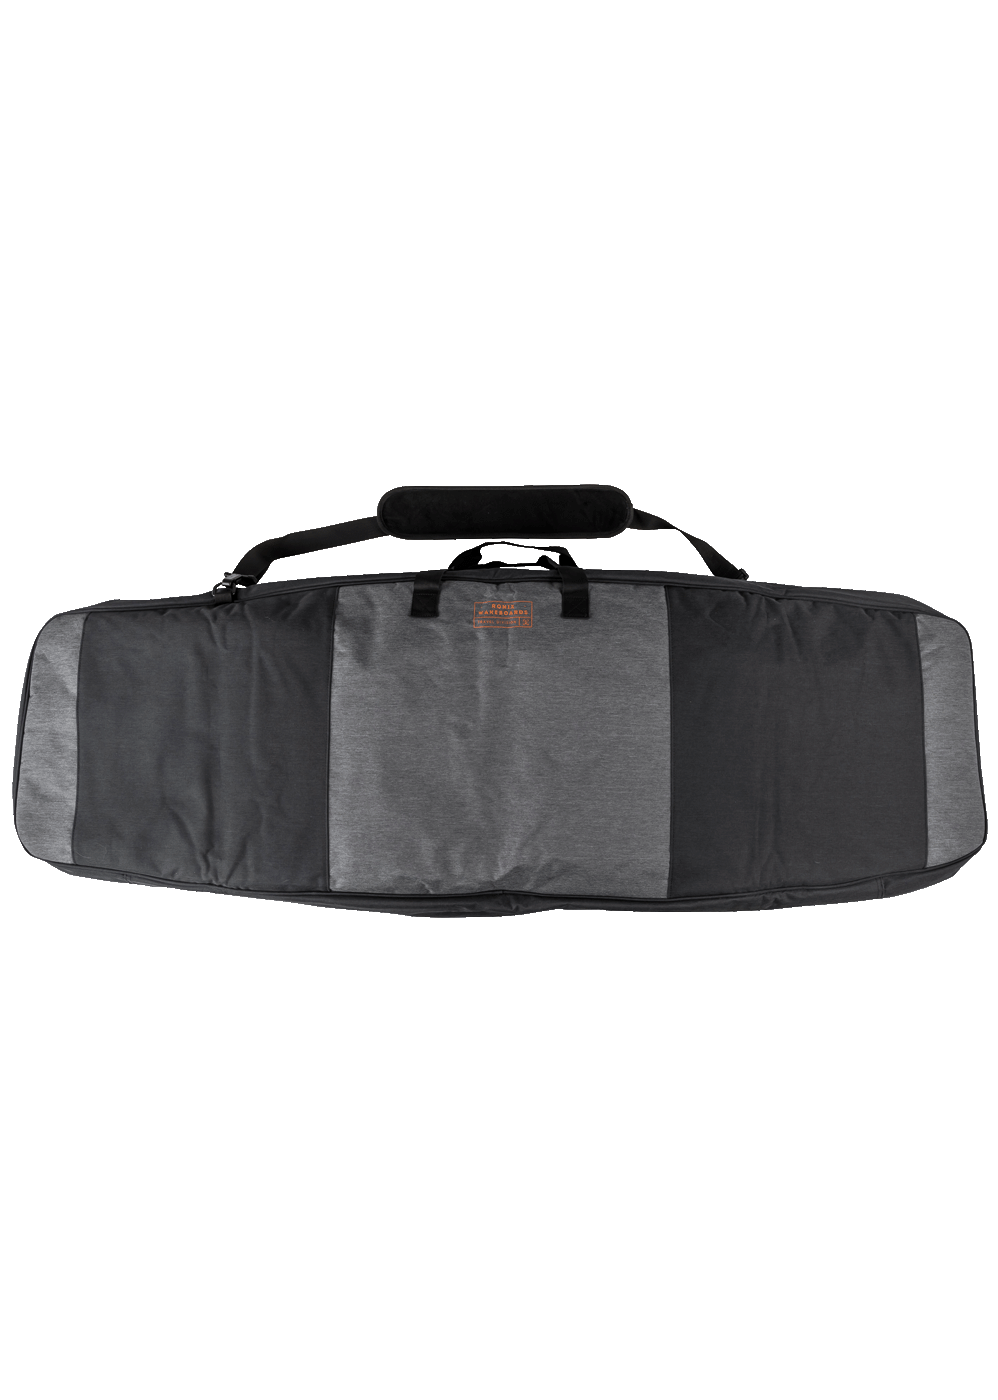 2022 Ronix Bags Squadron Padded Board Case Back copy